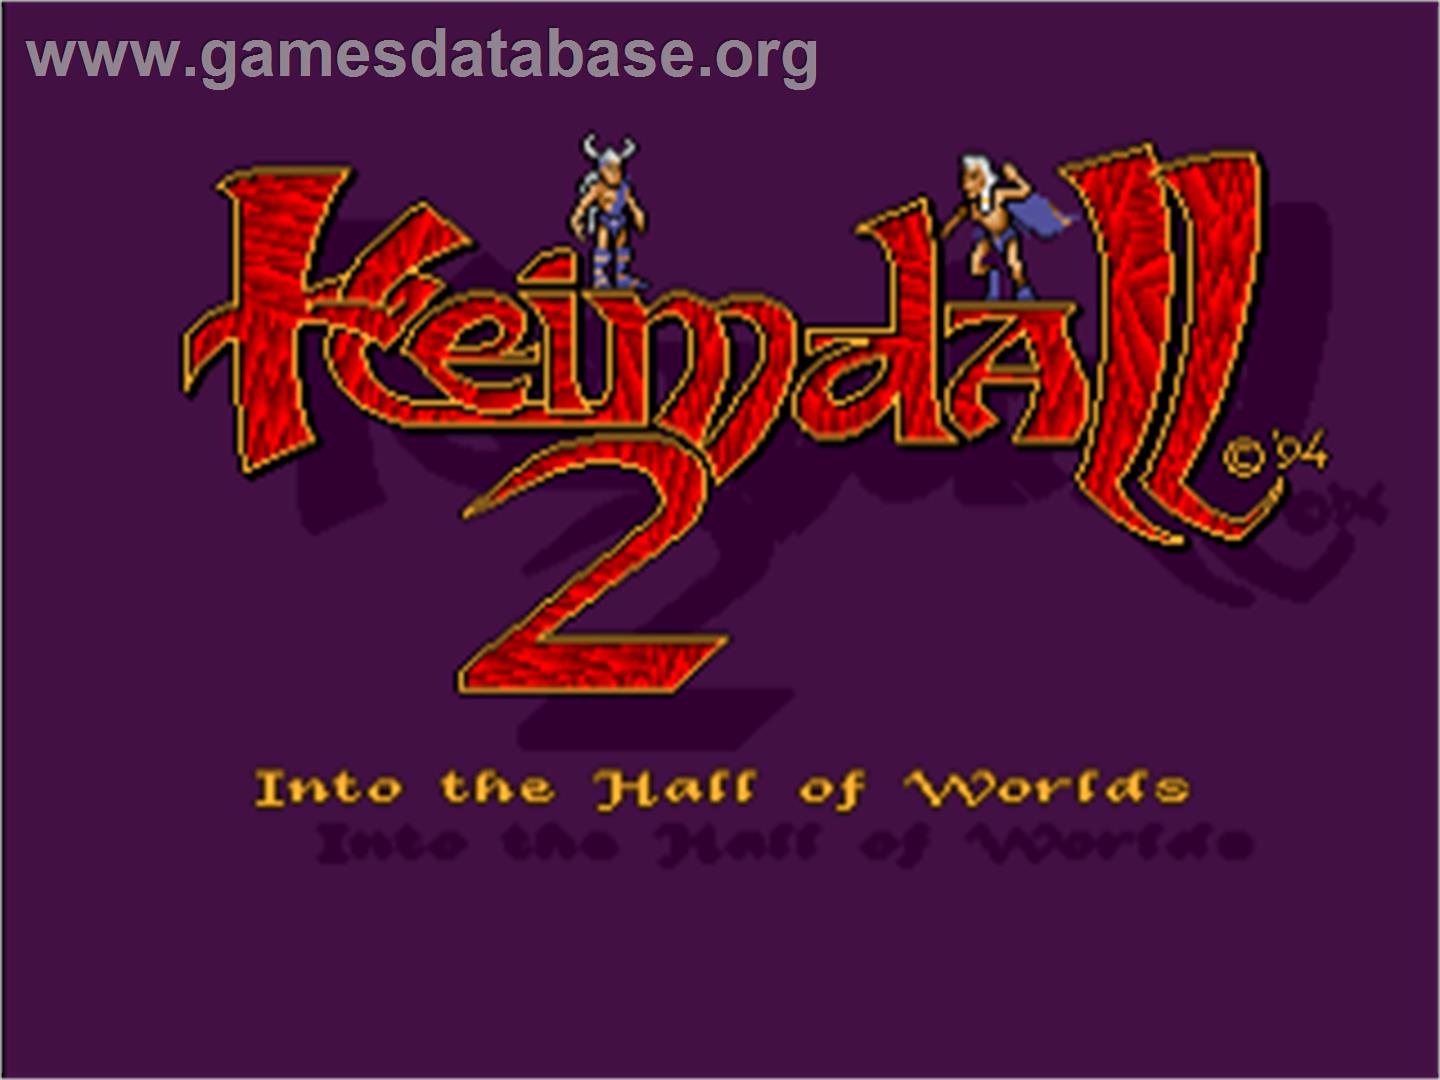 Heimdall 2: Into the Hall of Worlds - Commodore Amiga - Artwork - Title Screen